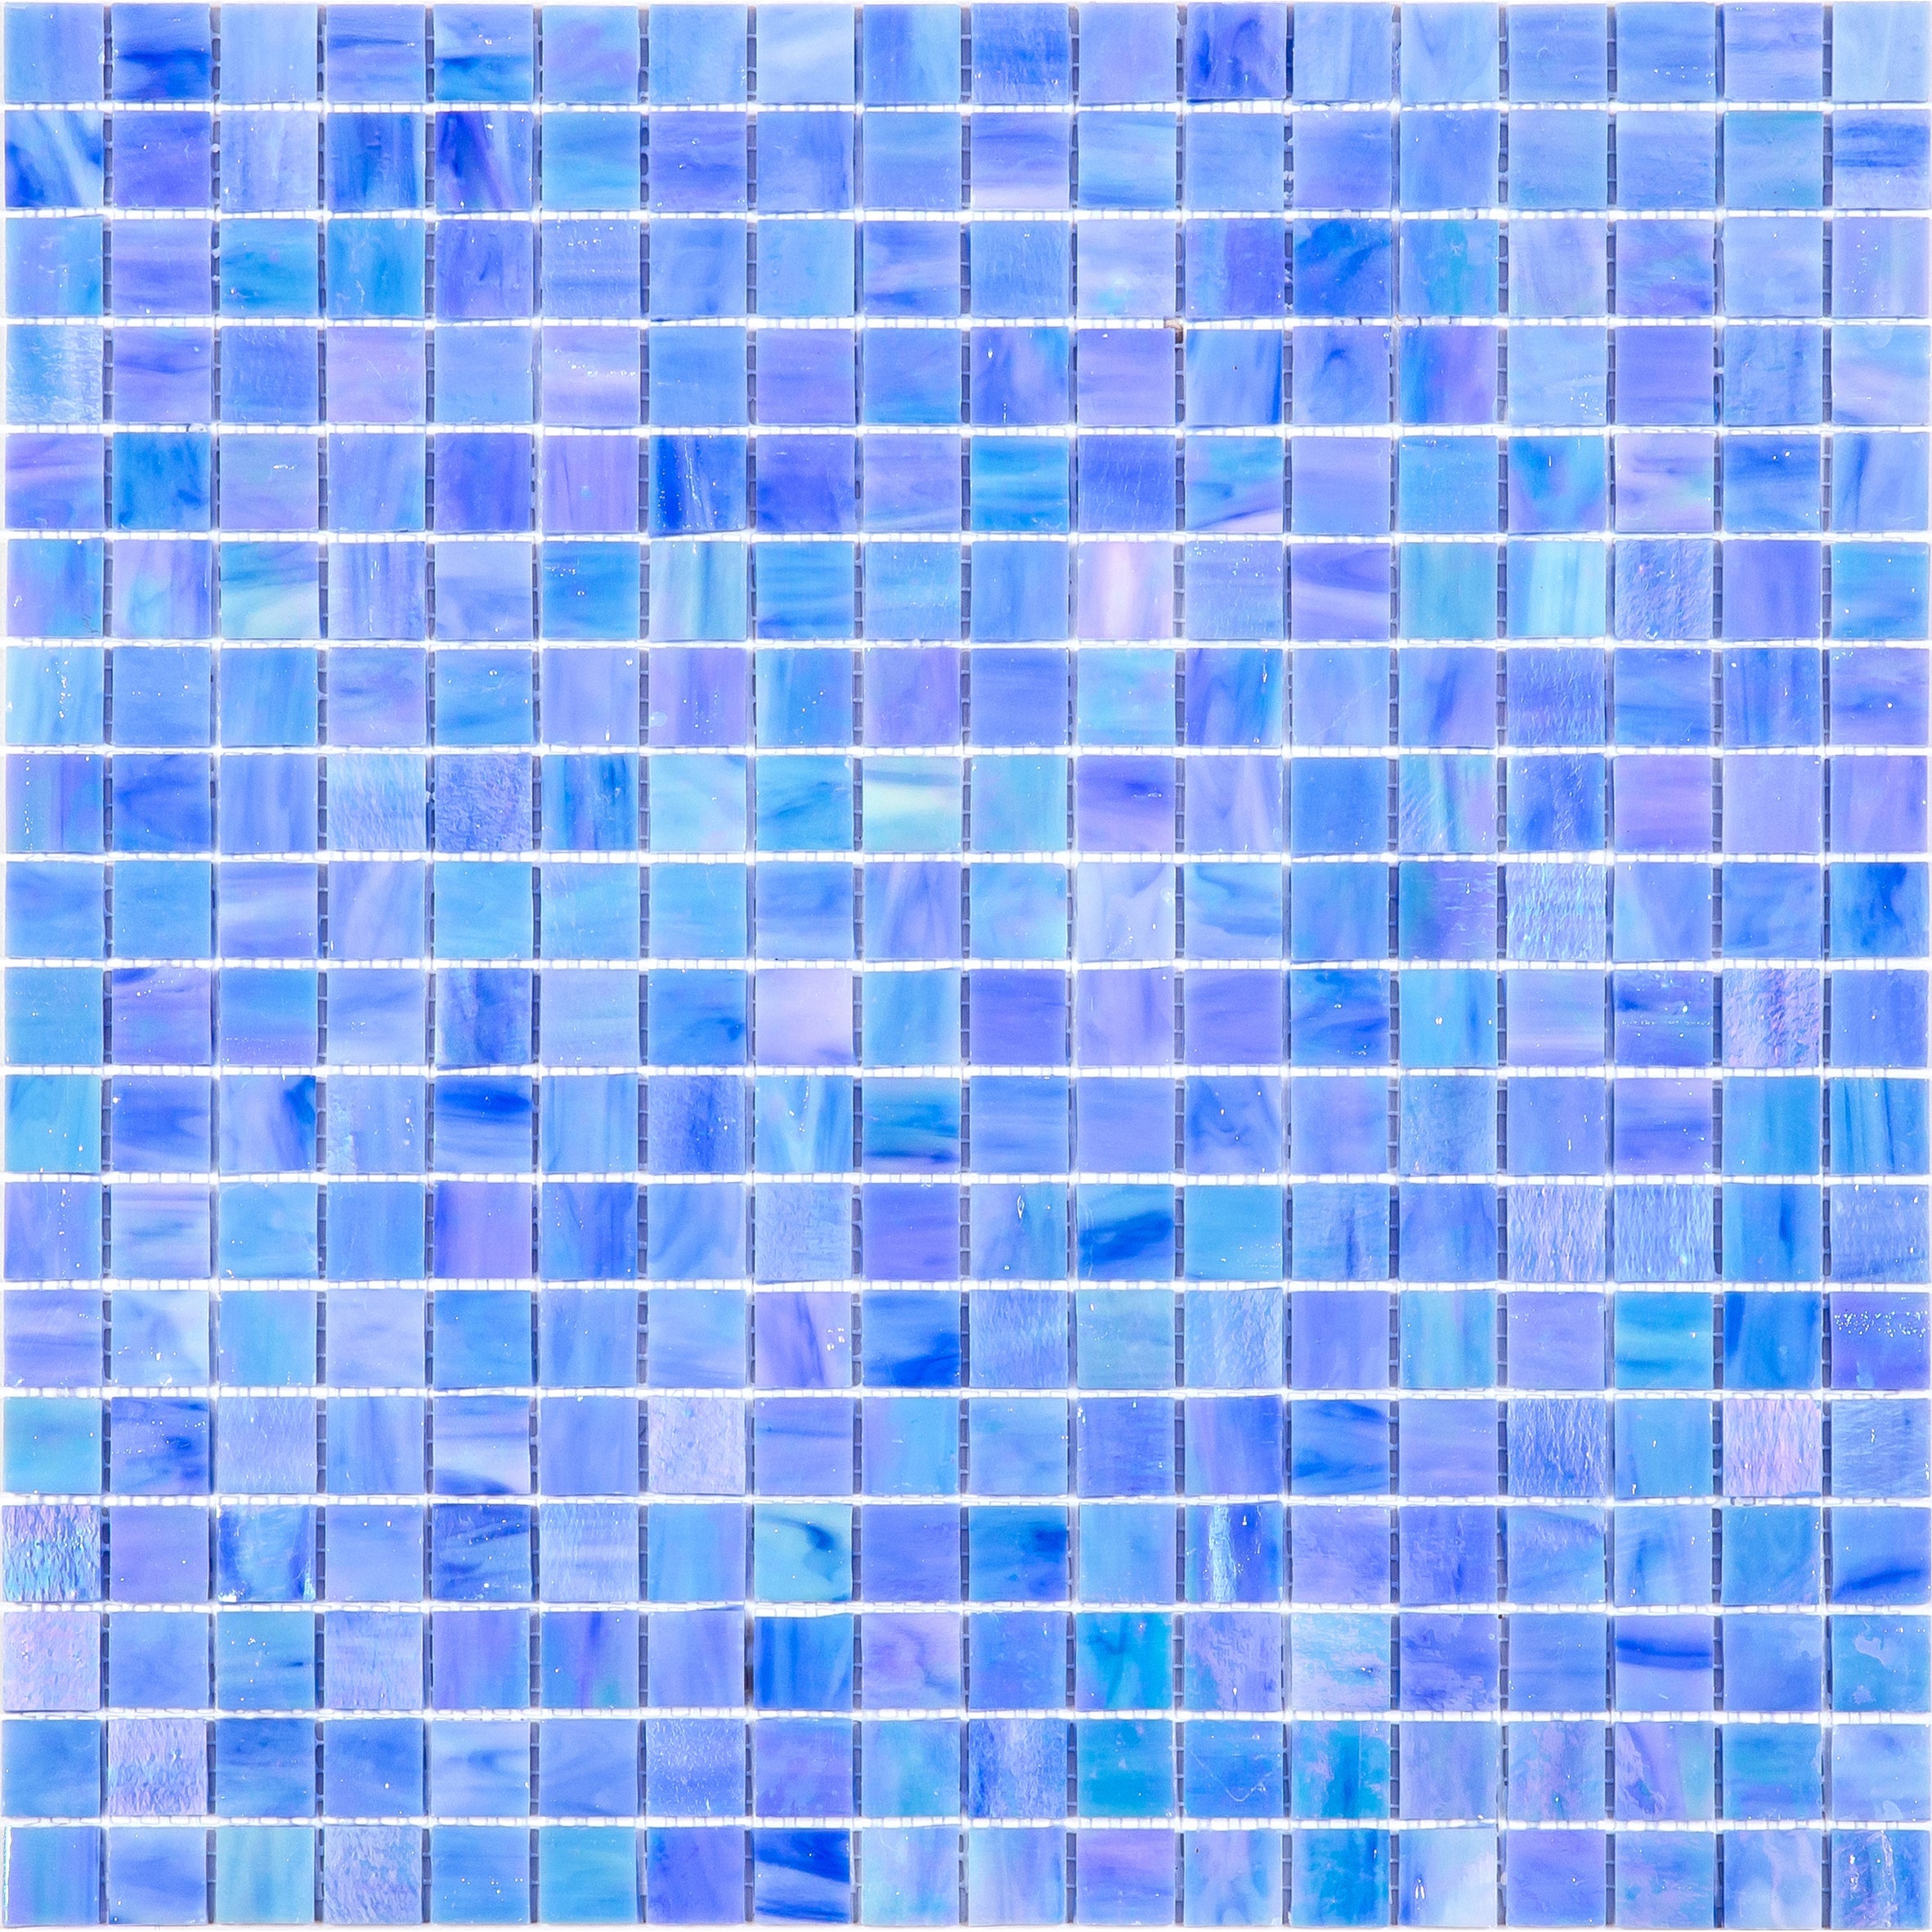 mir alma solid colors 0_6 inch nibble sm39 wall and floor mosaic distributed by surface group natural materials